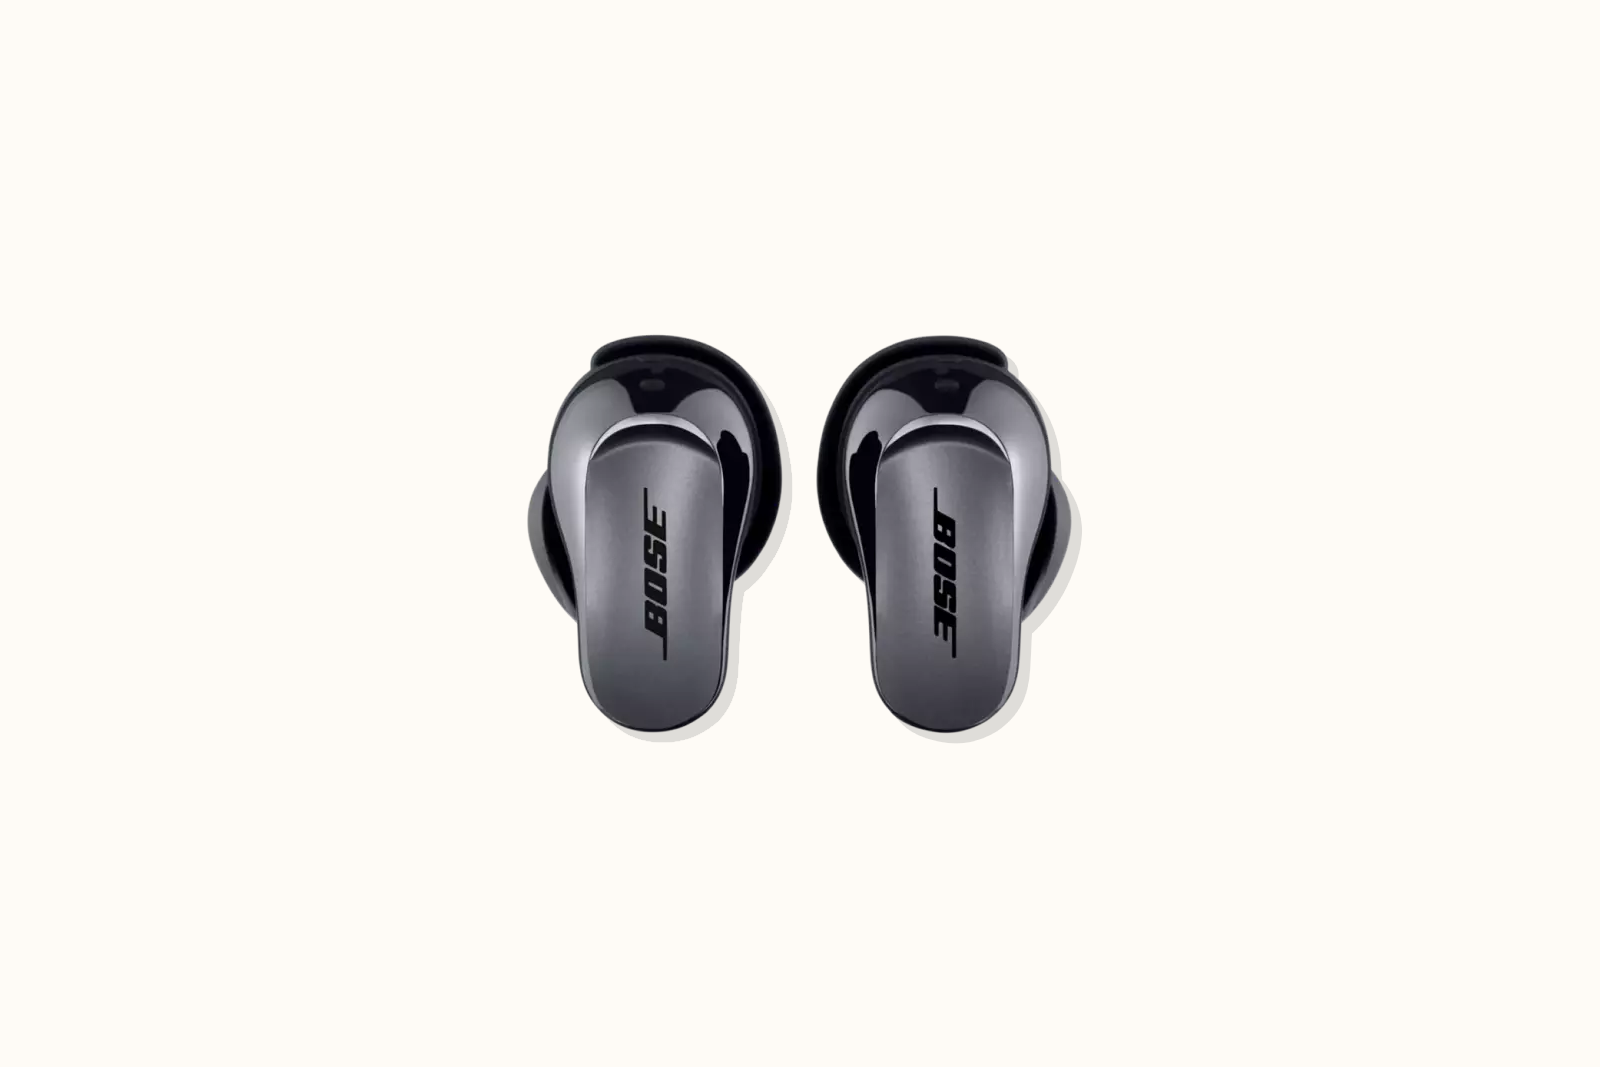 A featured image with the Bose QuietComfort Ultra Earbuds logo at the center